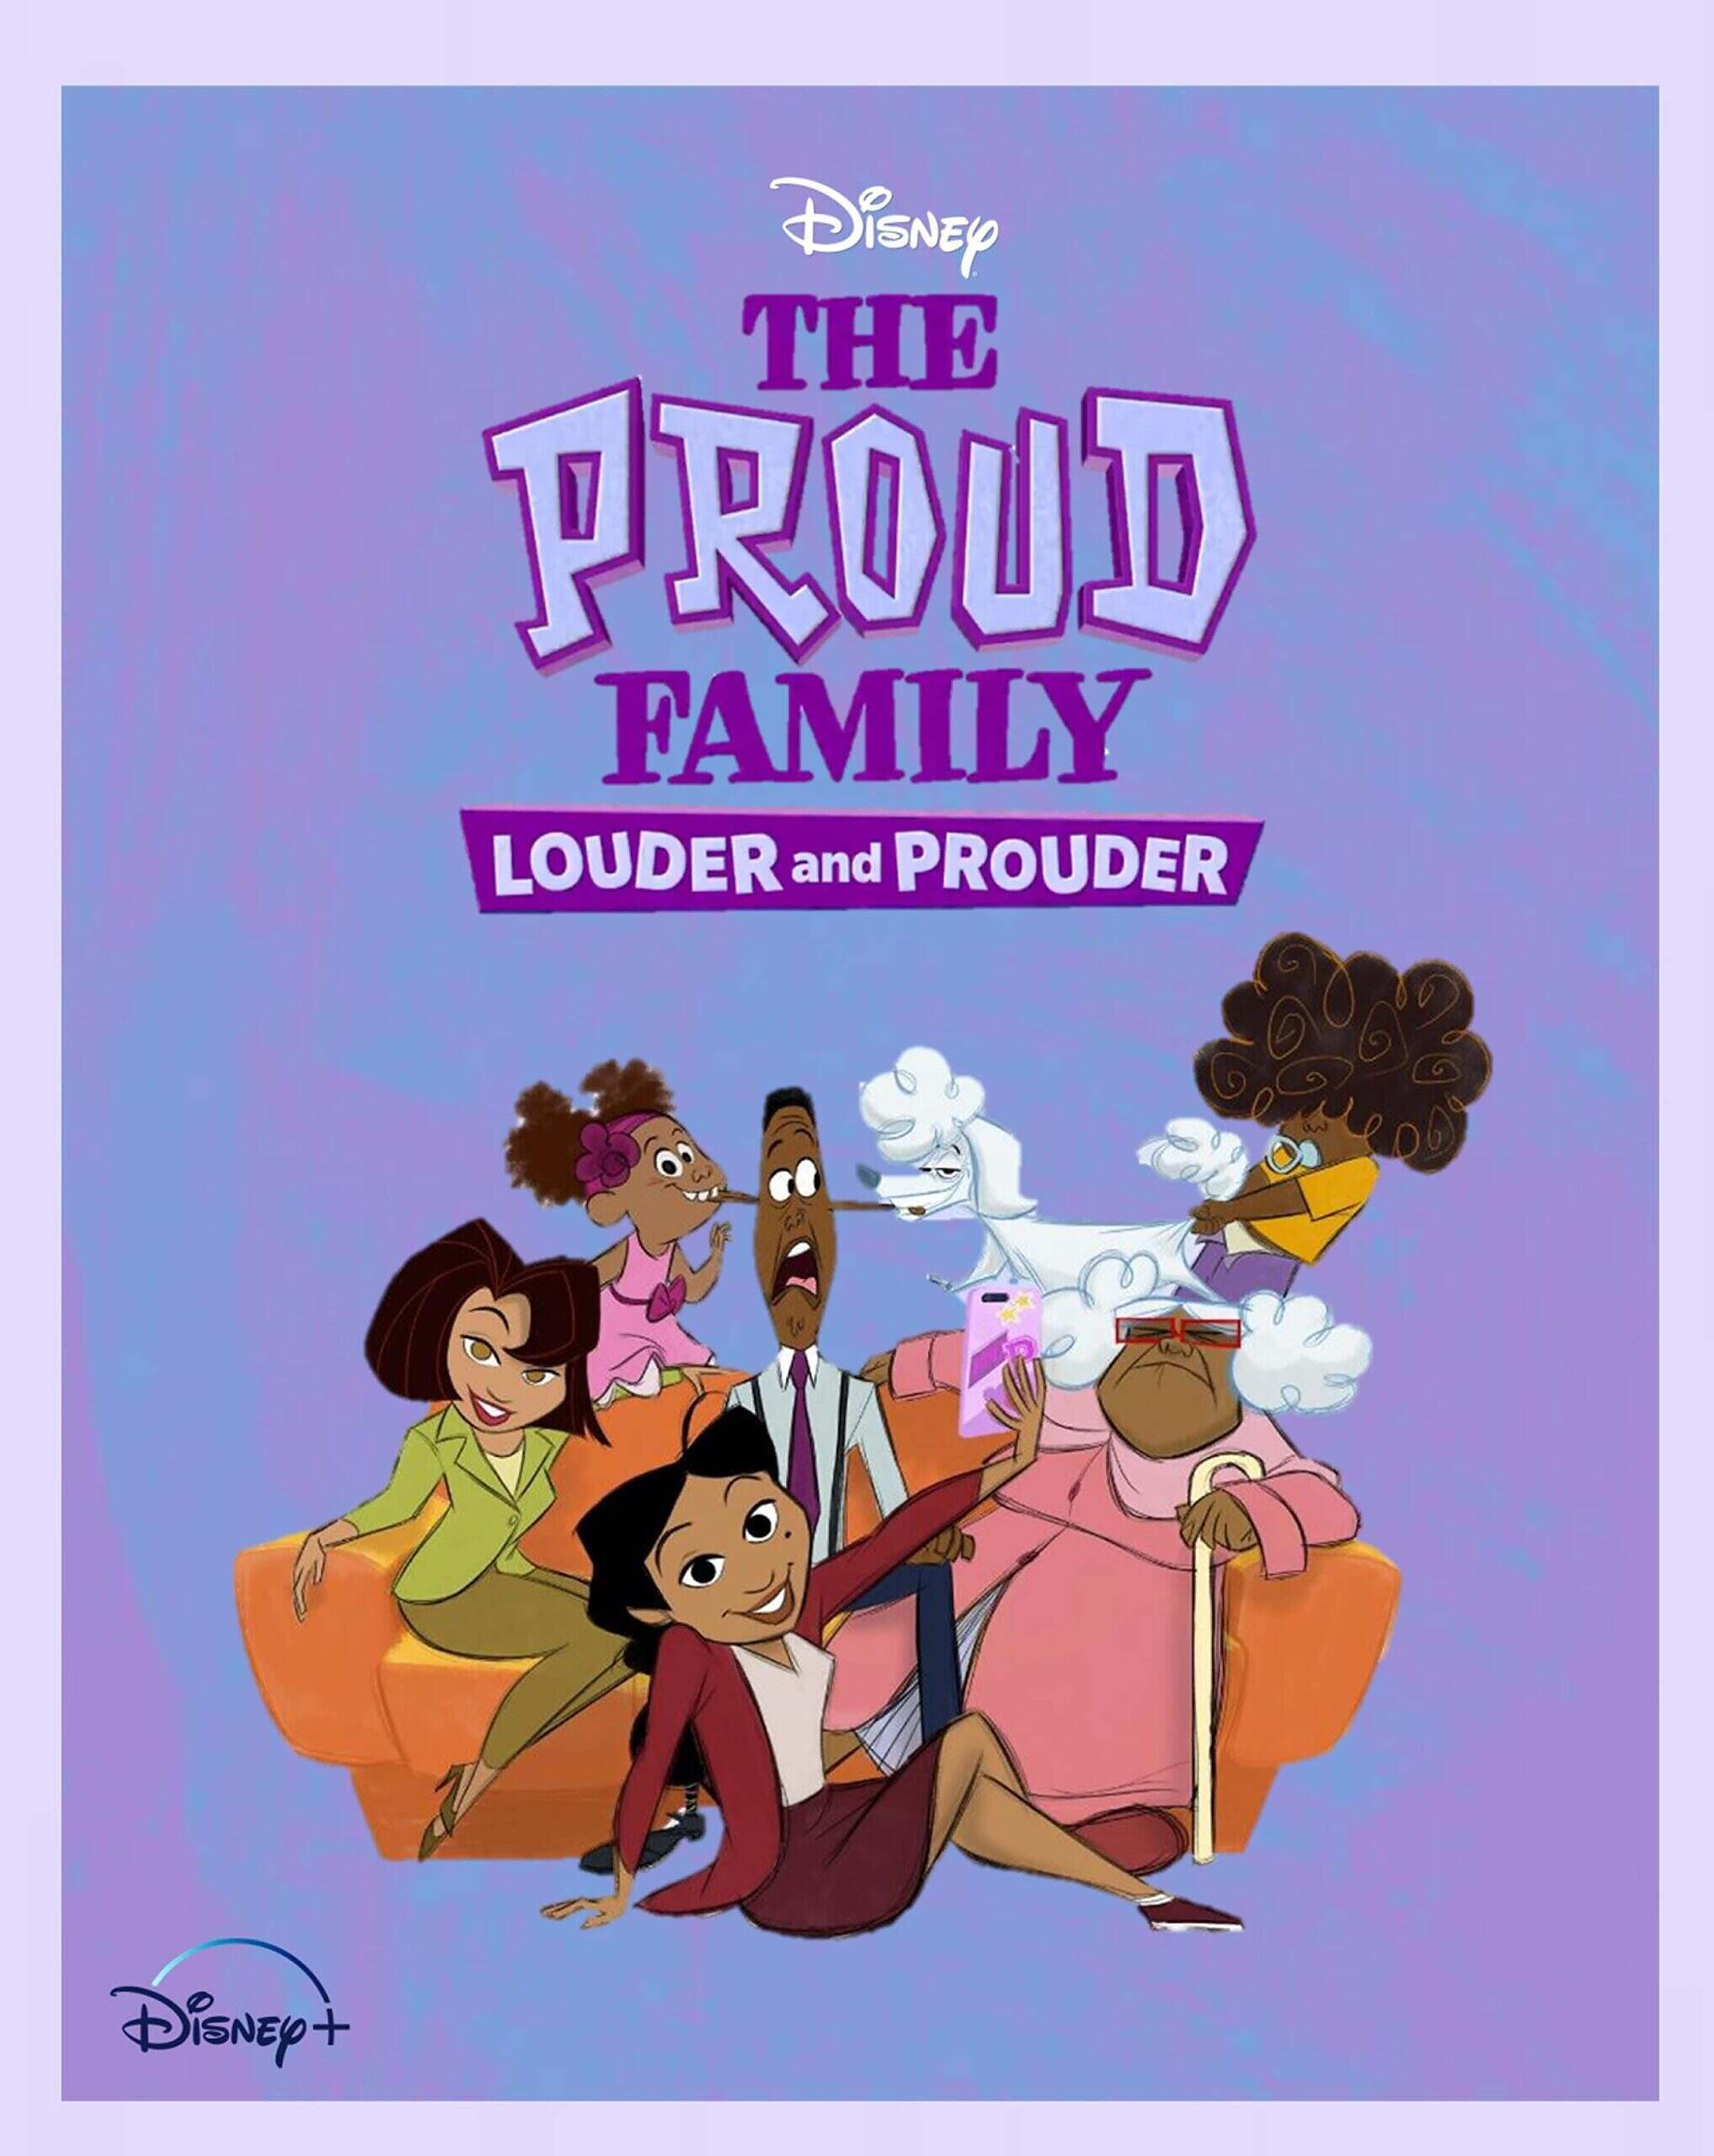 1st Trailer For Disney+ Original Series ‘The Proud Family: Louder And Prouder’ Starring Lizzo & Lil Nas X